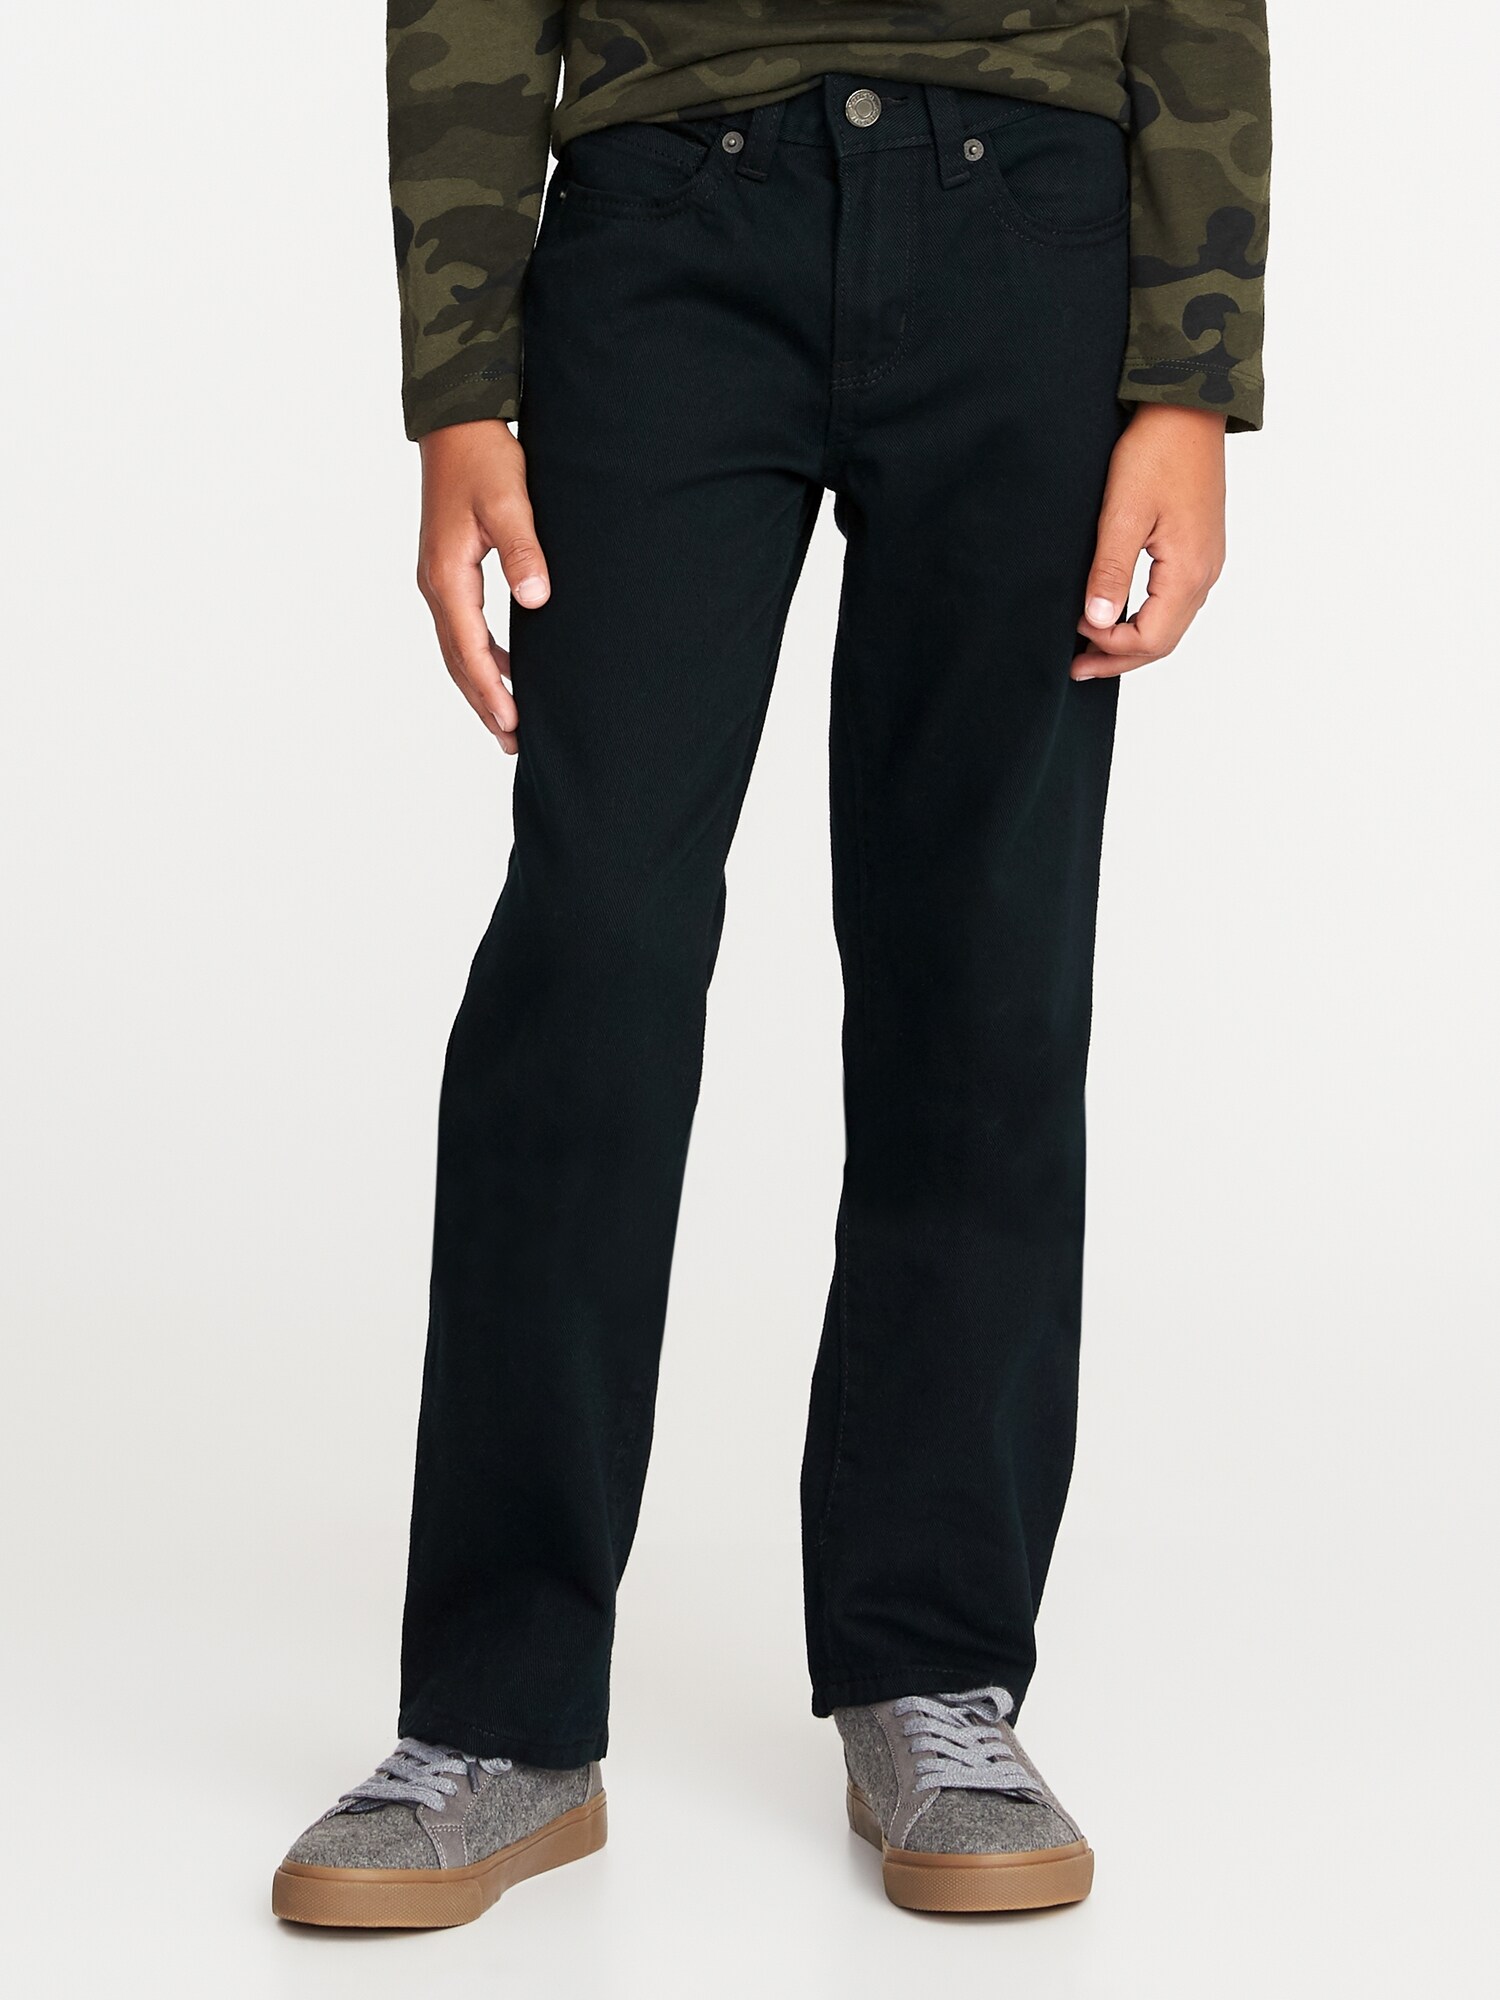 *Hot Deal* Straight Non-Stretch Five-Pocket Pants for Boys